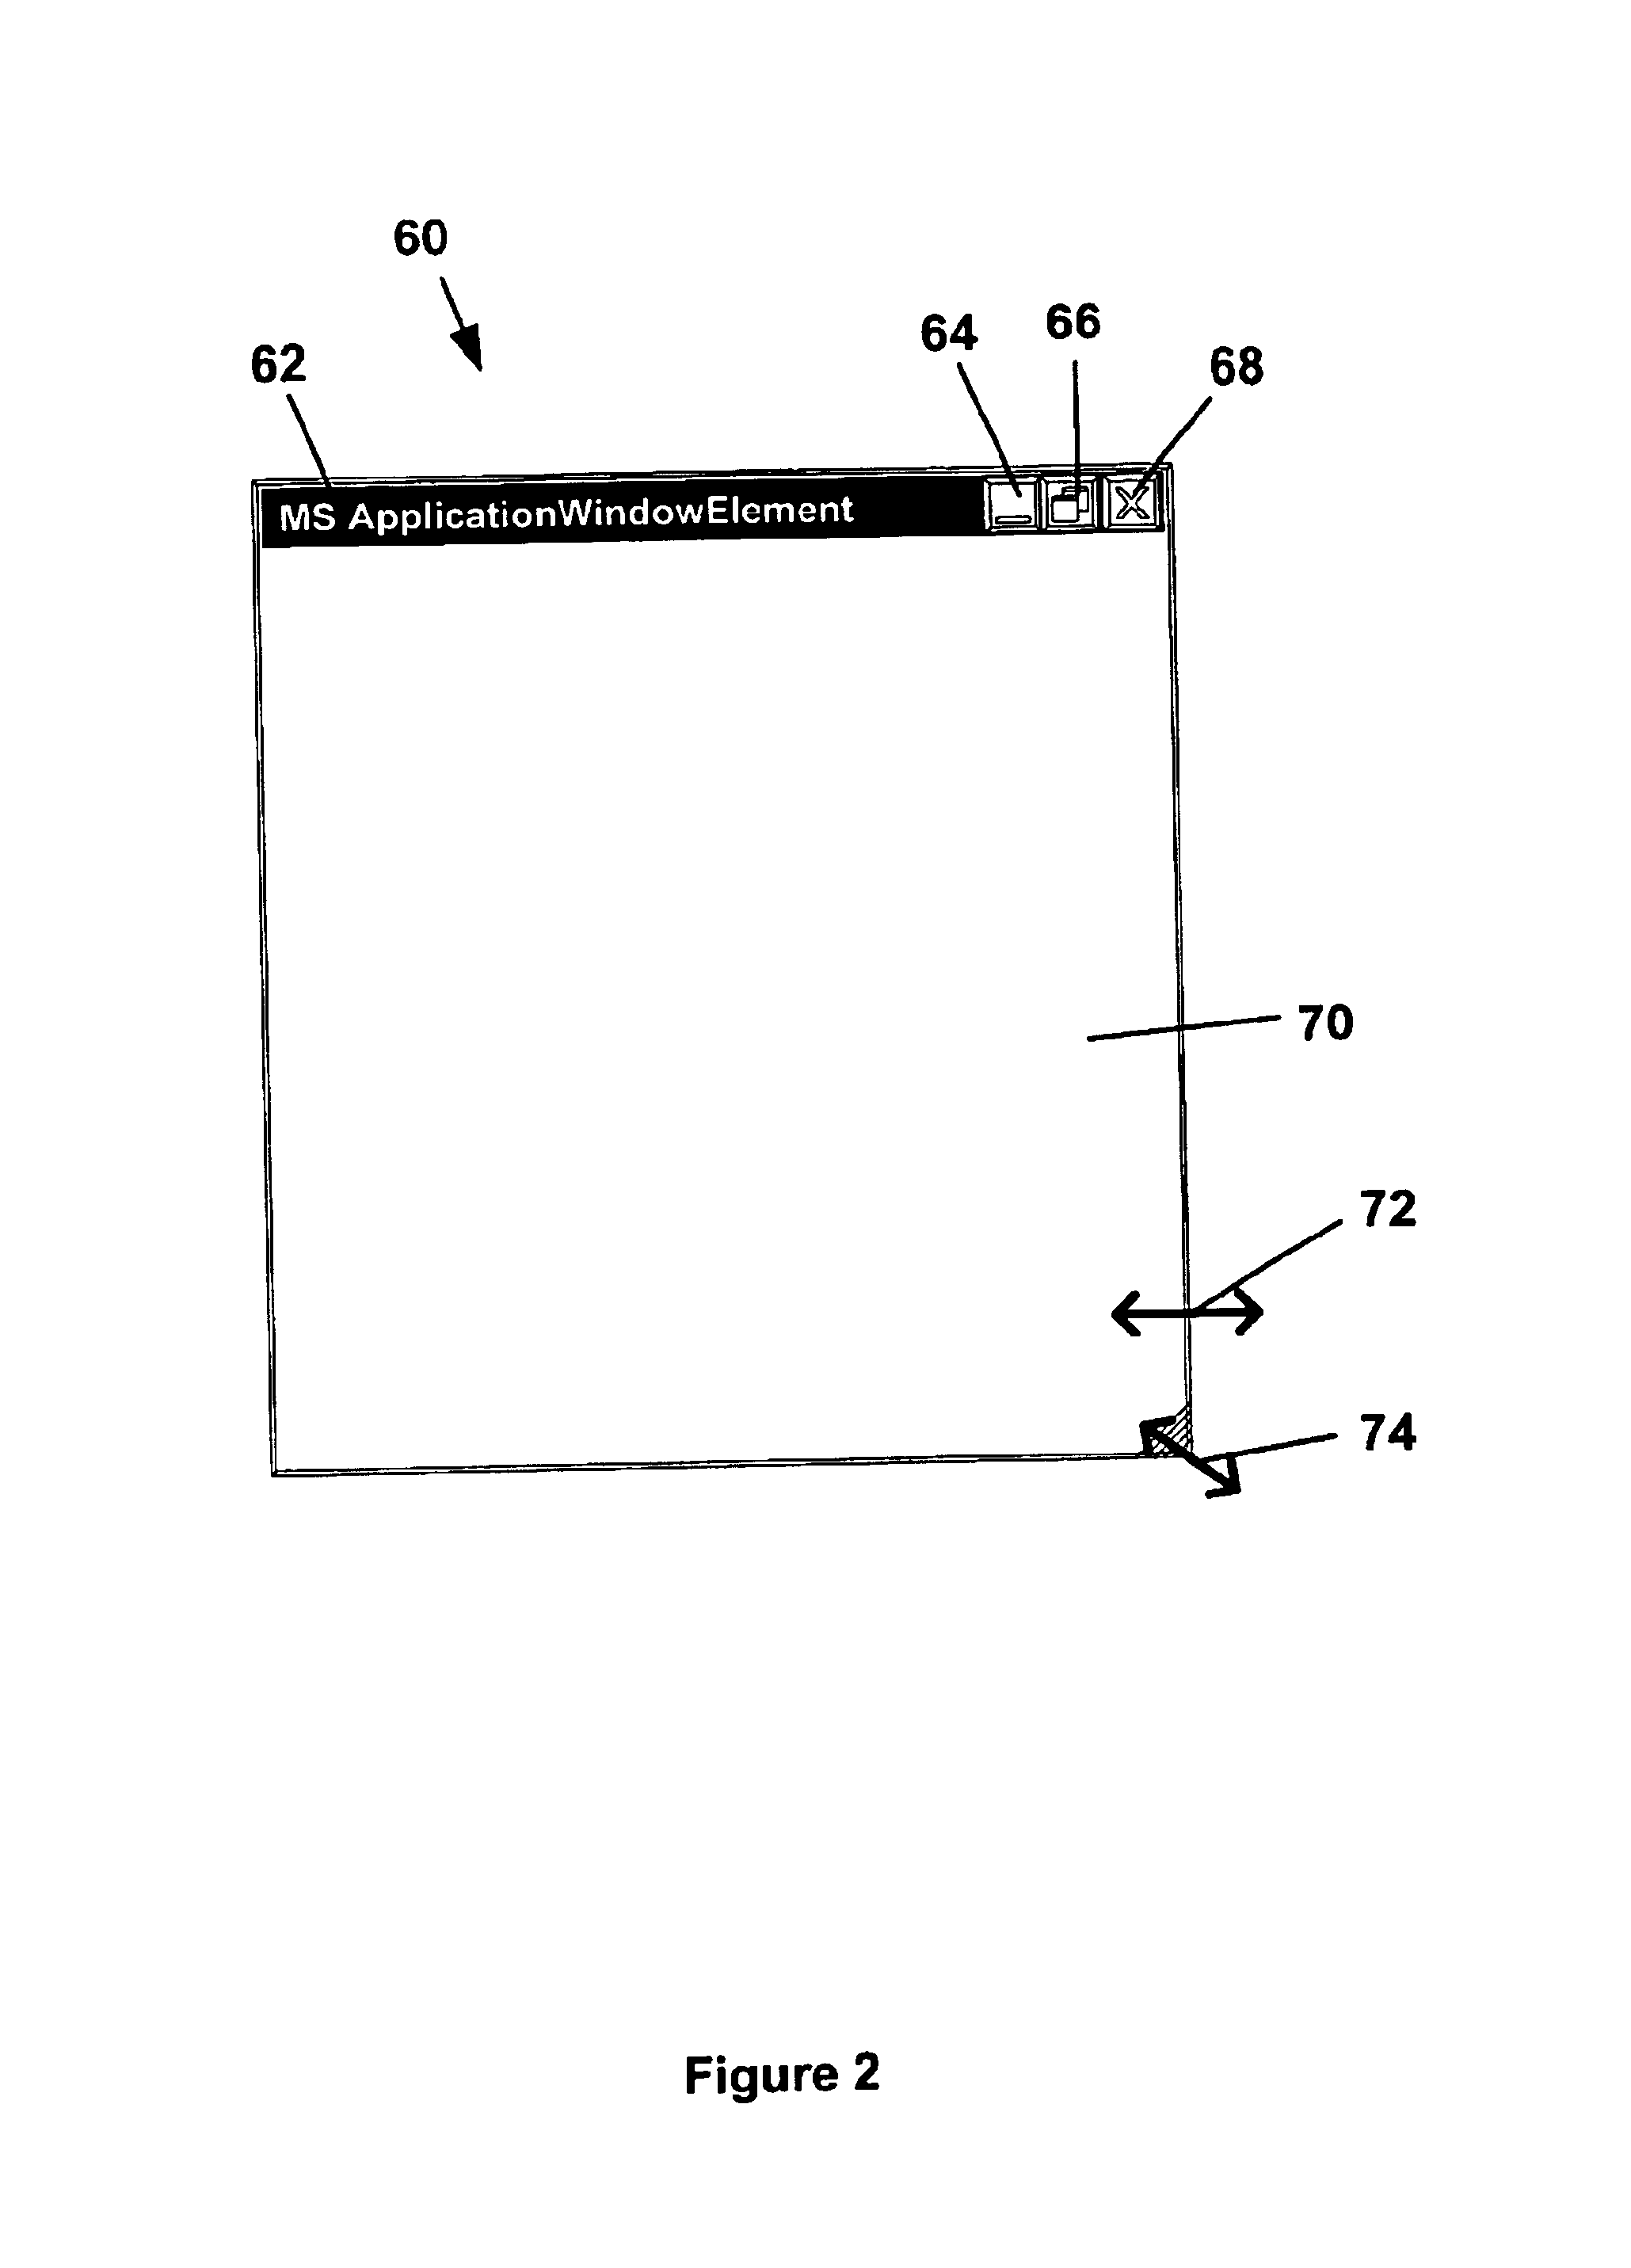 Responsive user interface to manage a non-responsive application